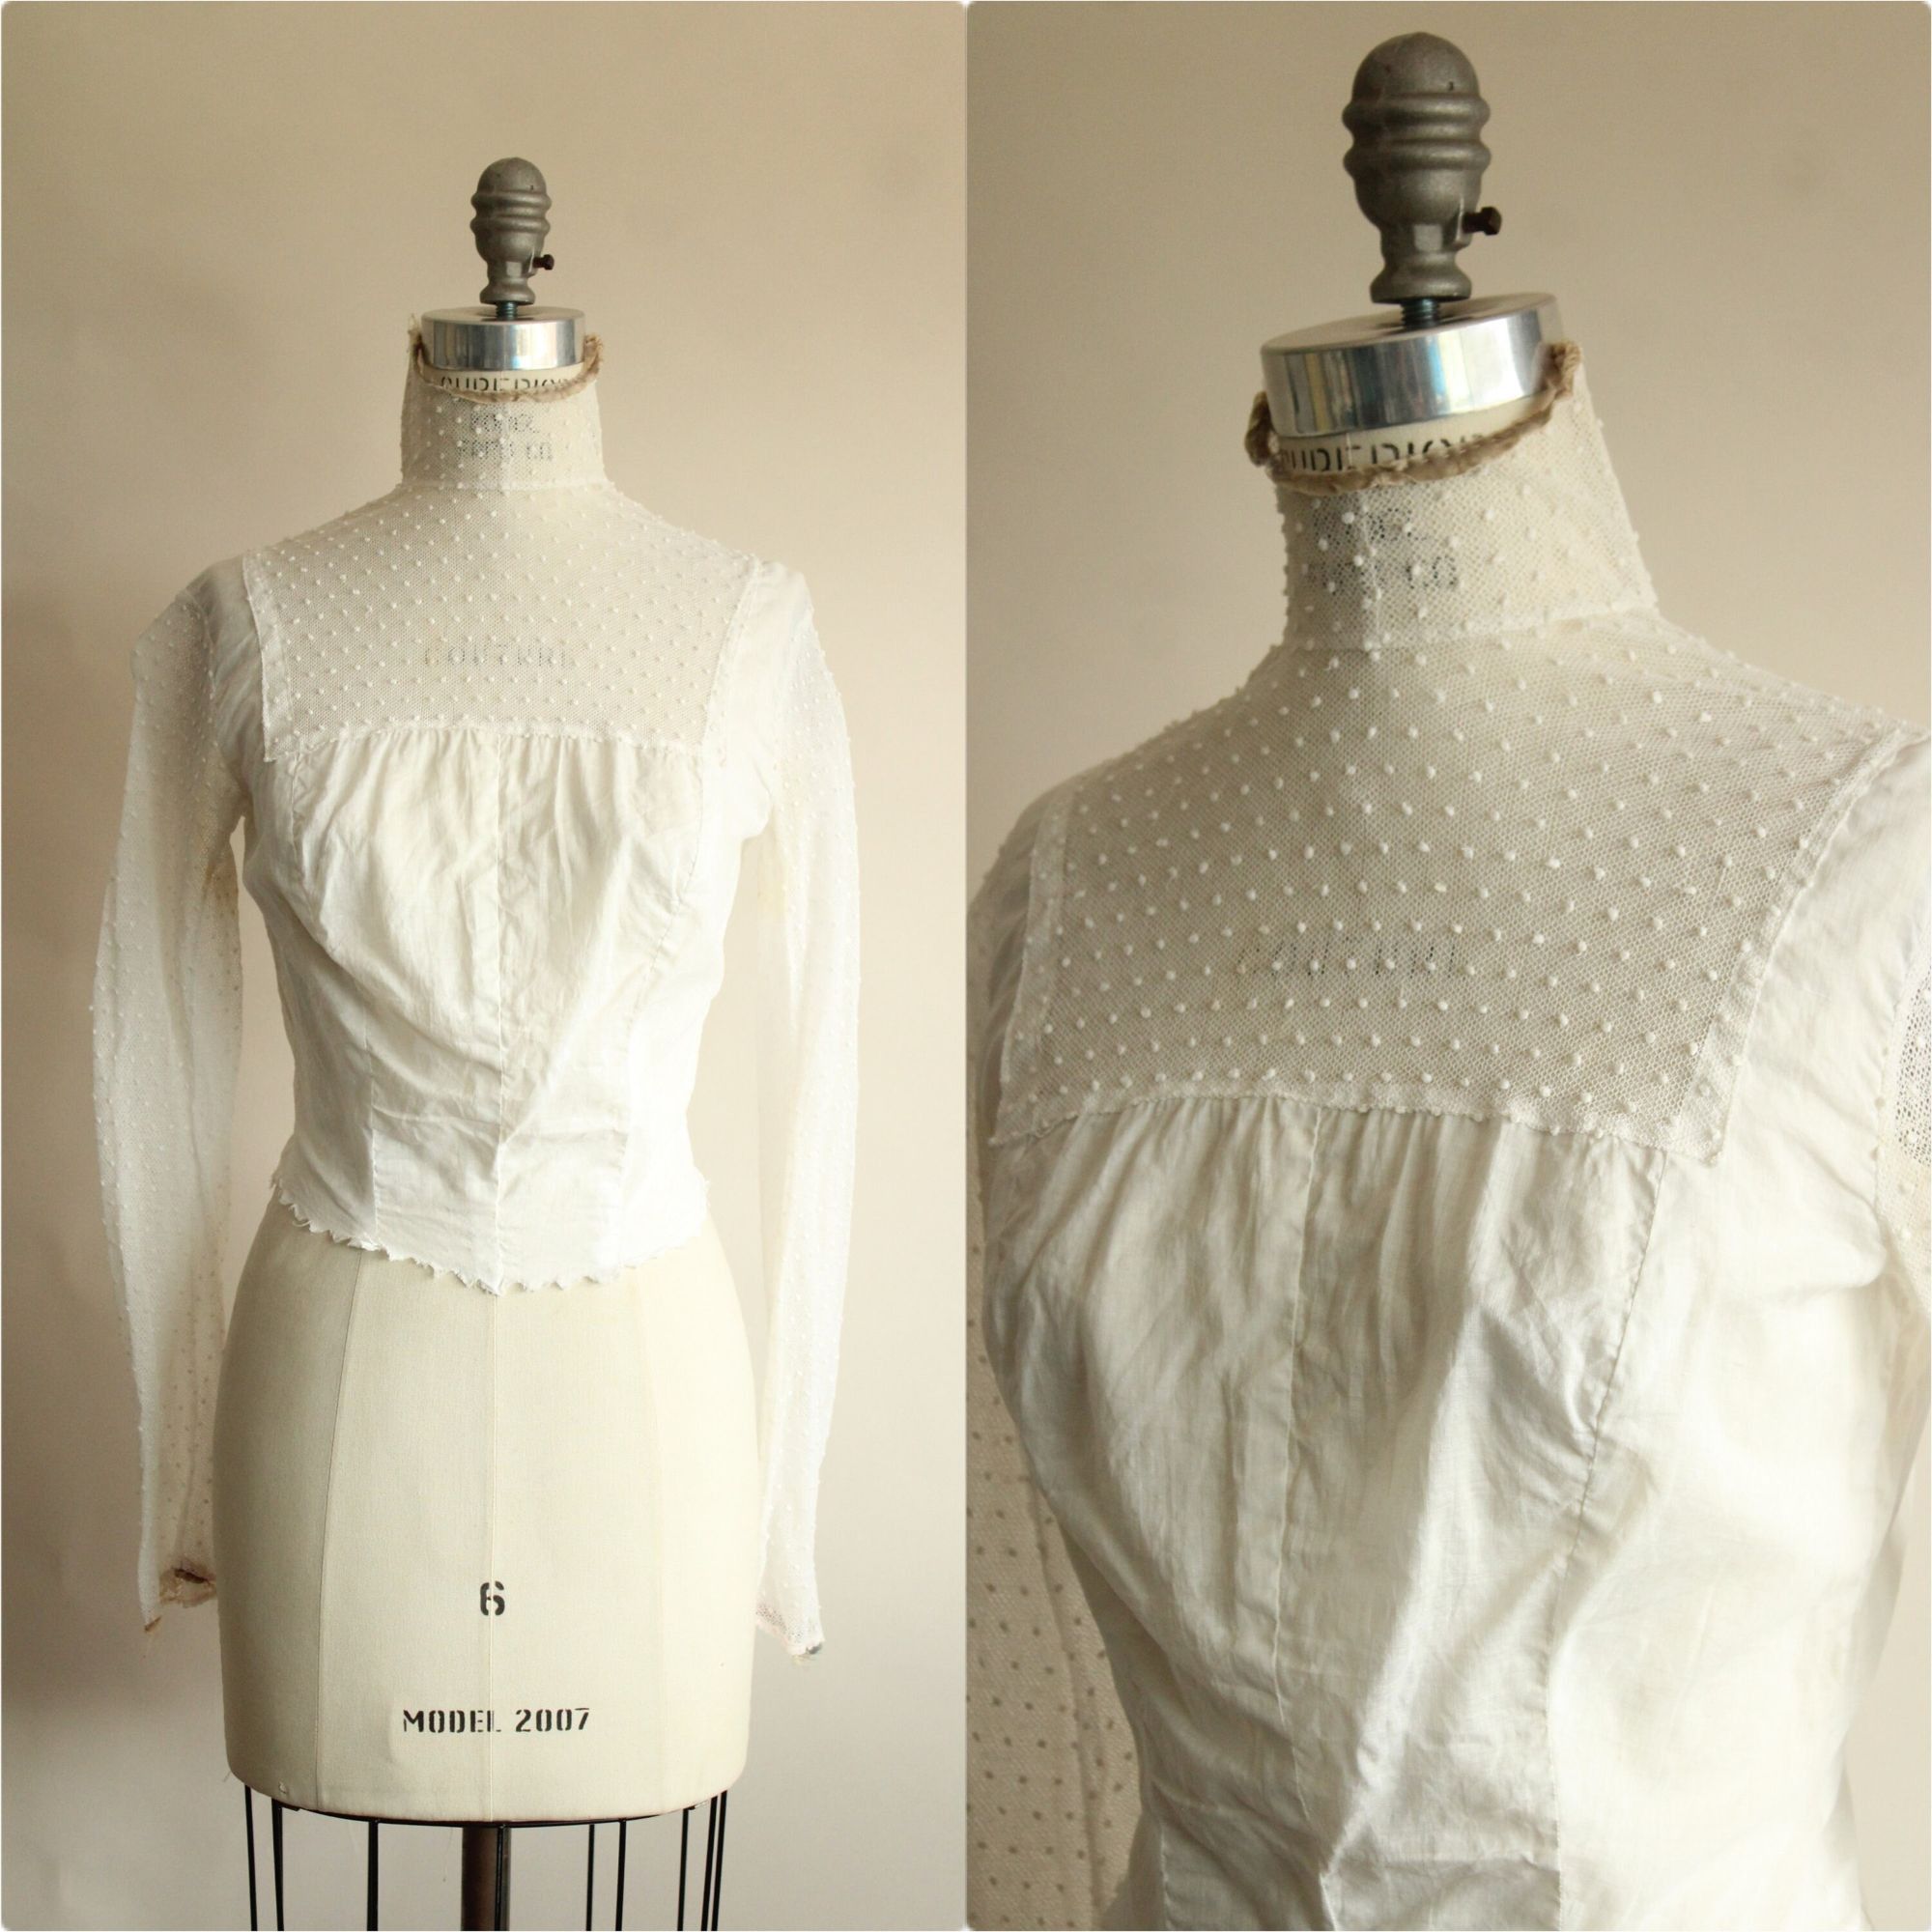 Vintage Antique 1900s Blouse In White With Lace Front. Pigeon Bust Size M / US 6-8 / IT 42-44 - 1 Preview